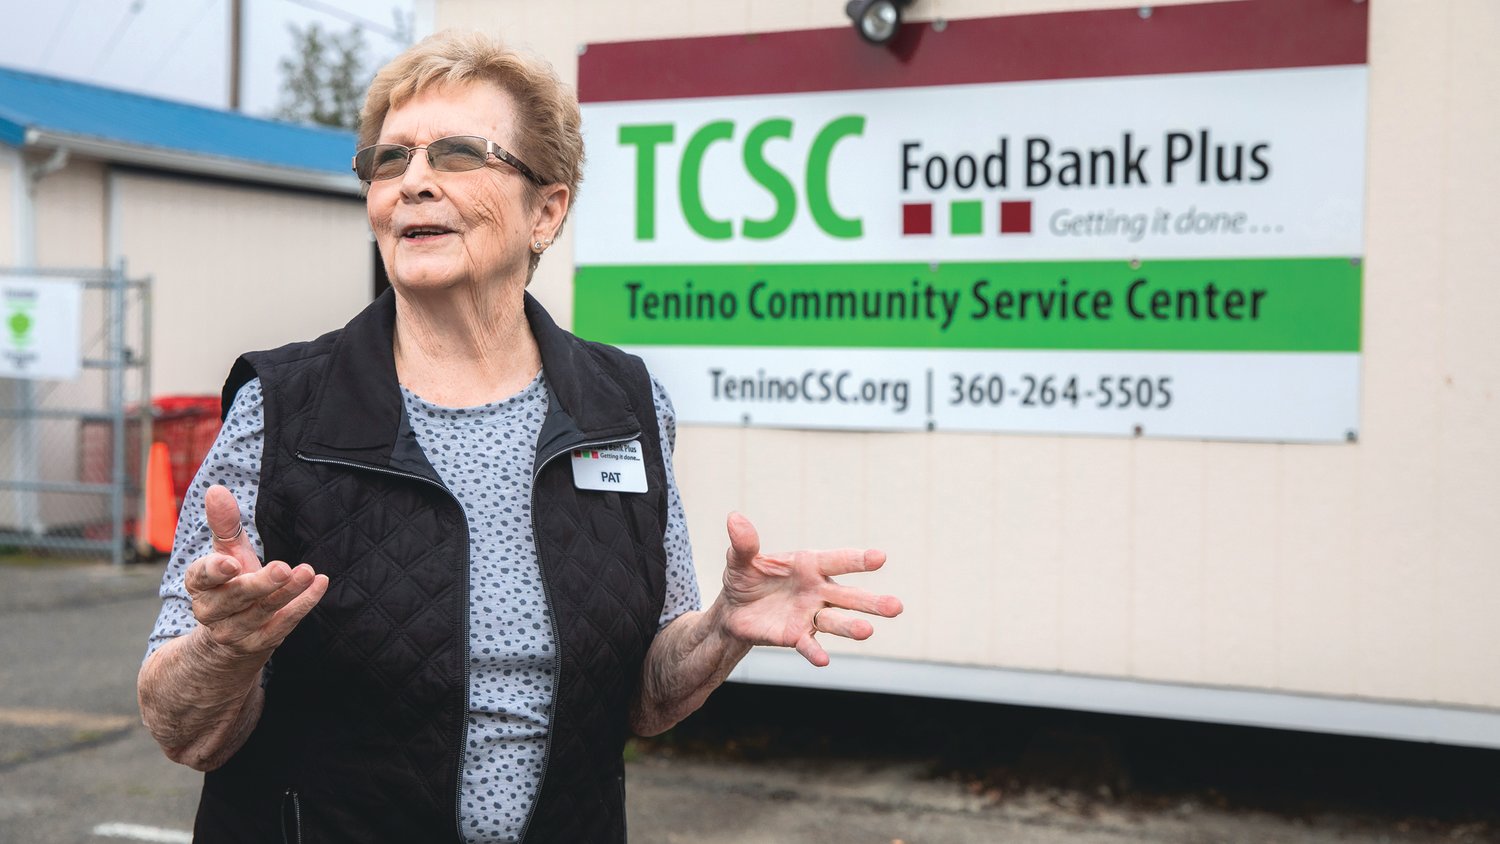 Pat Haller, chief financial officer at Tenino Food Bank Plus, talks about co-founding the Tenino Community Service Center with Robin Rudy Monday morning.